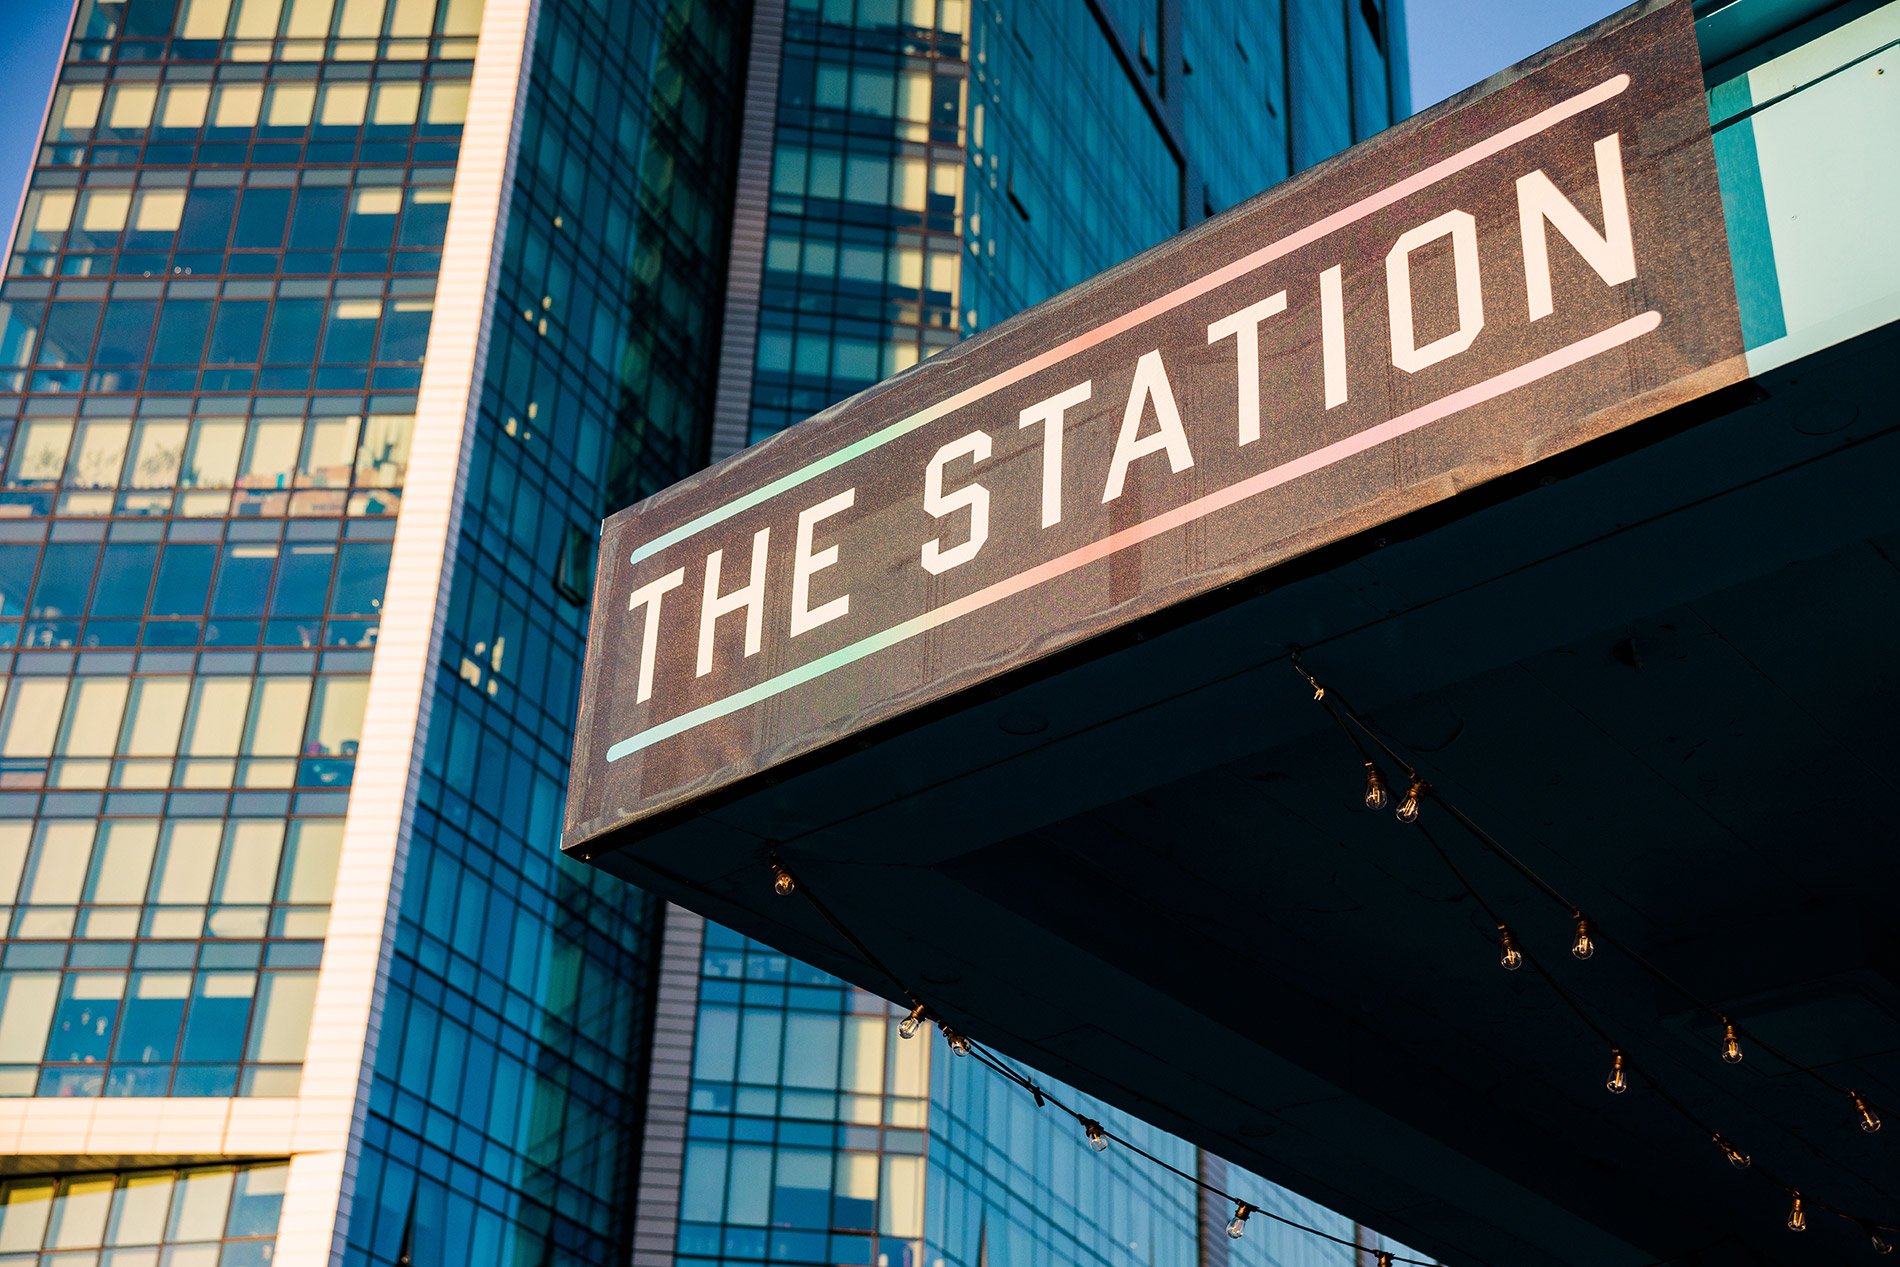 An edge of a building in the city with a sign on it that reads The Station.